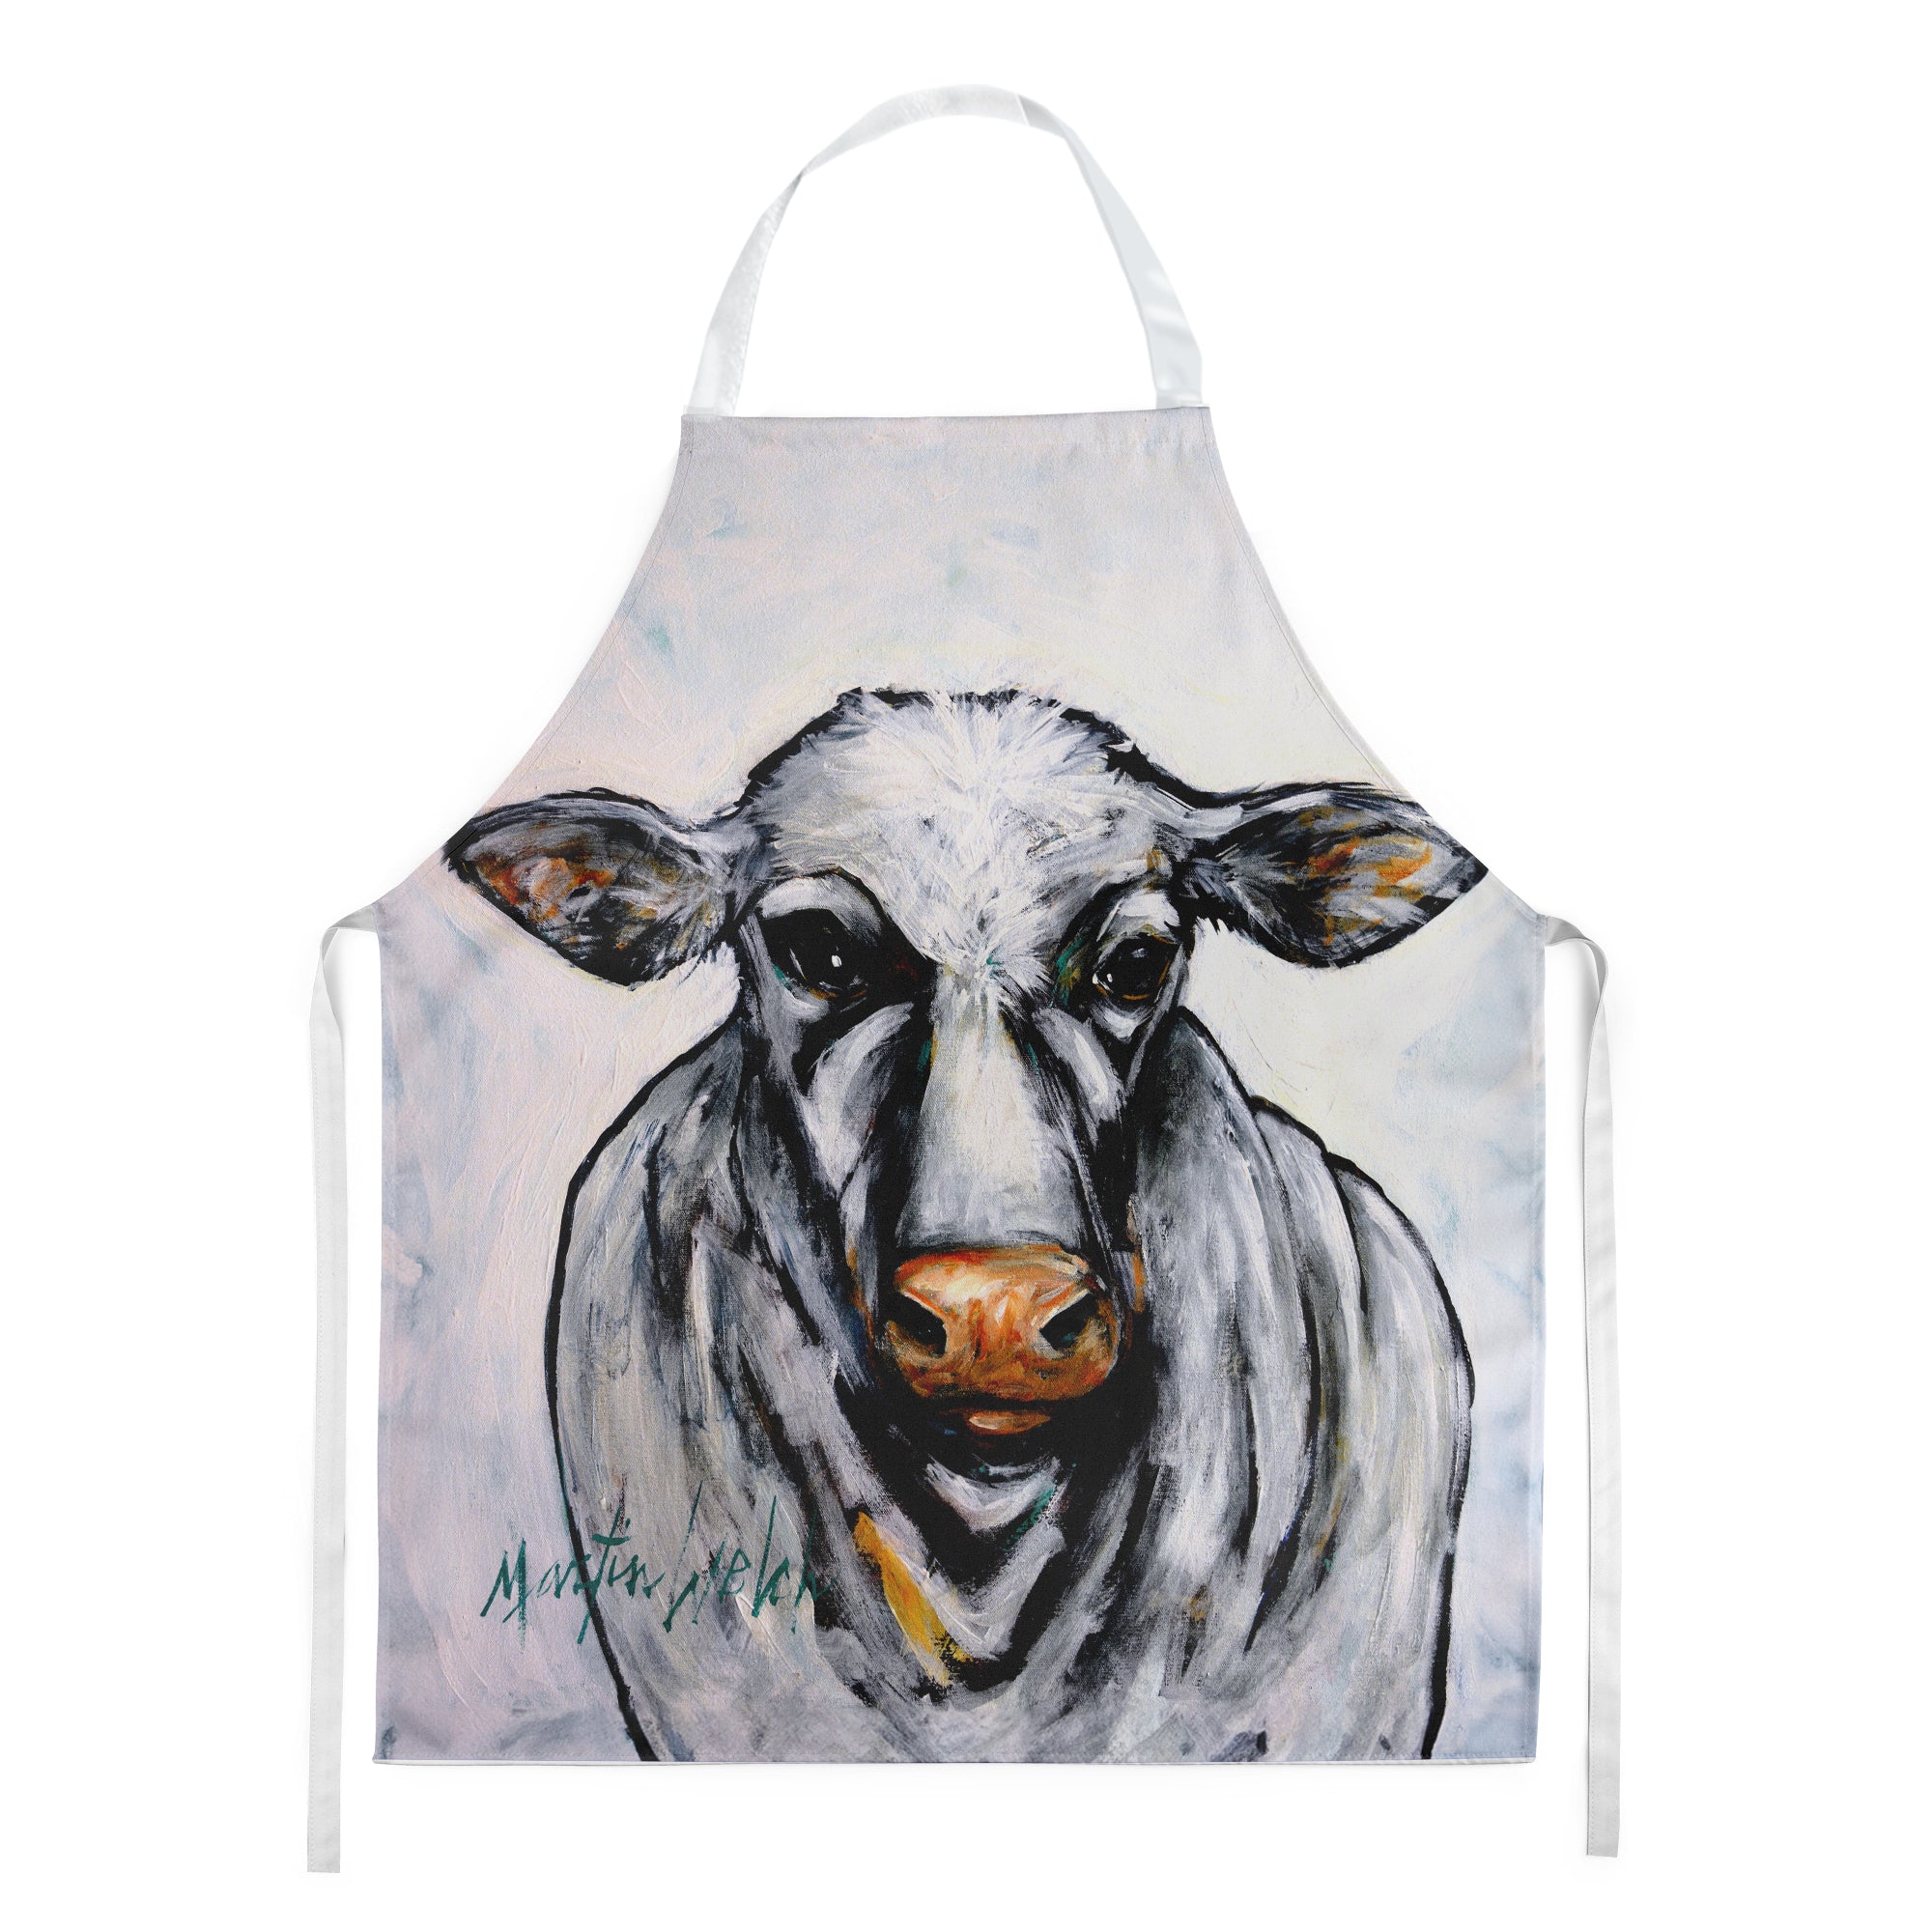 Buy this Bessie the Cow Apron